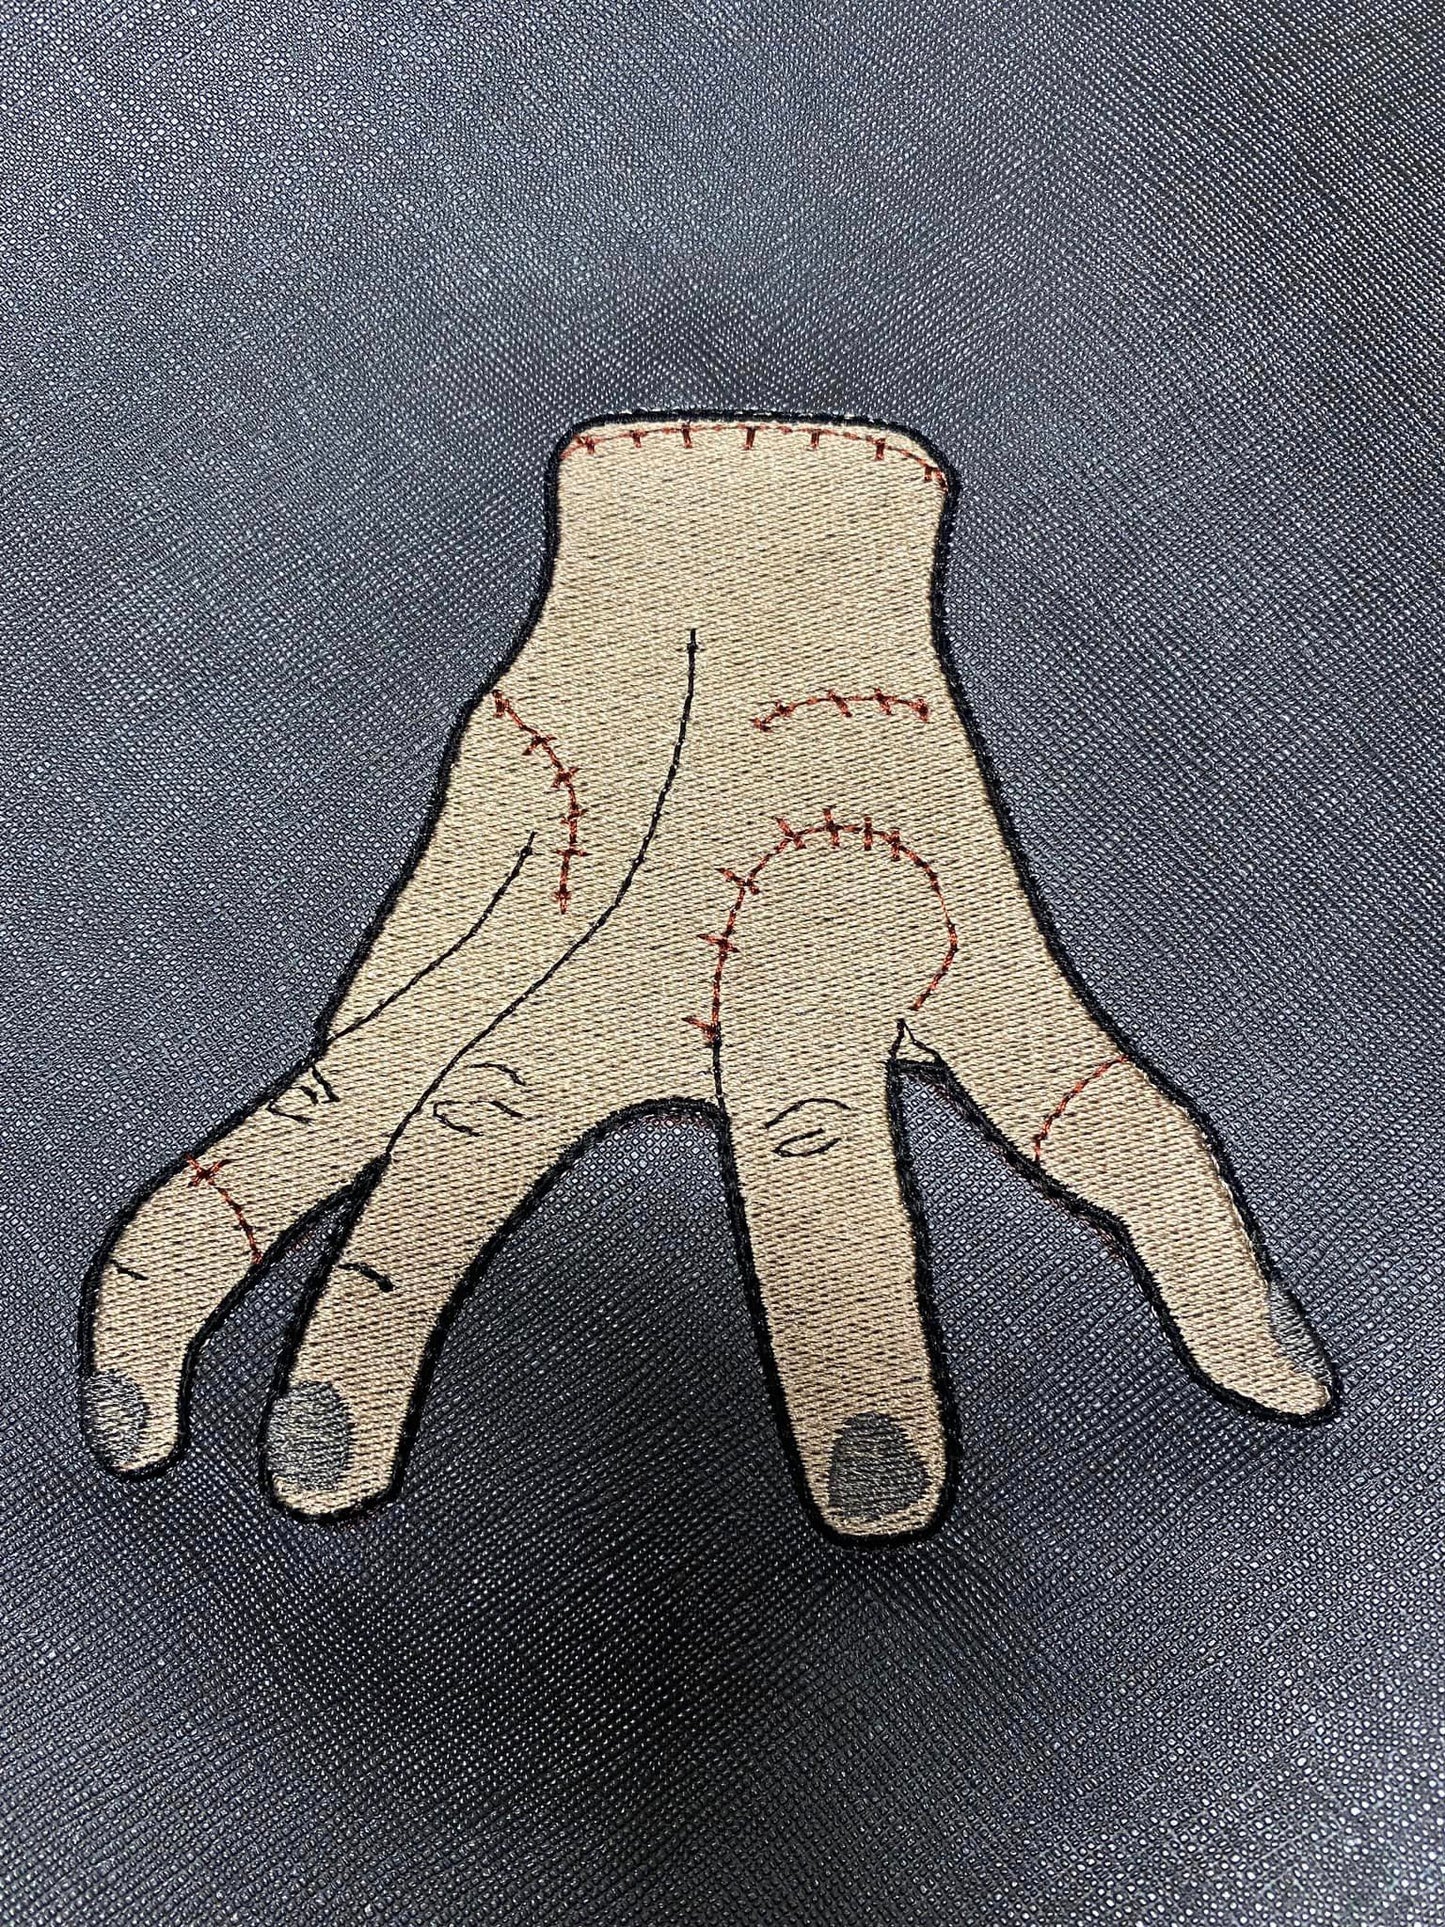 Spooky Hand fill and applique 5x7